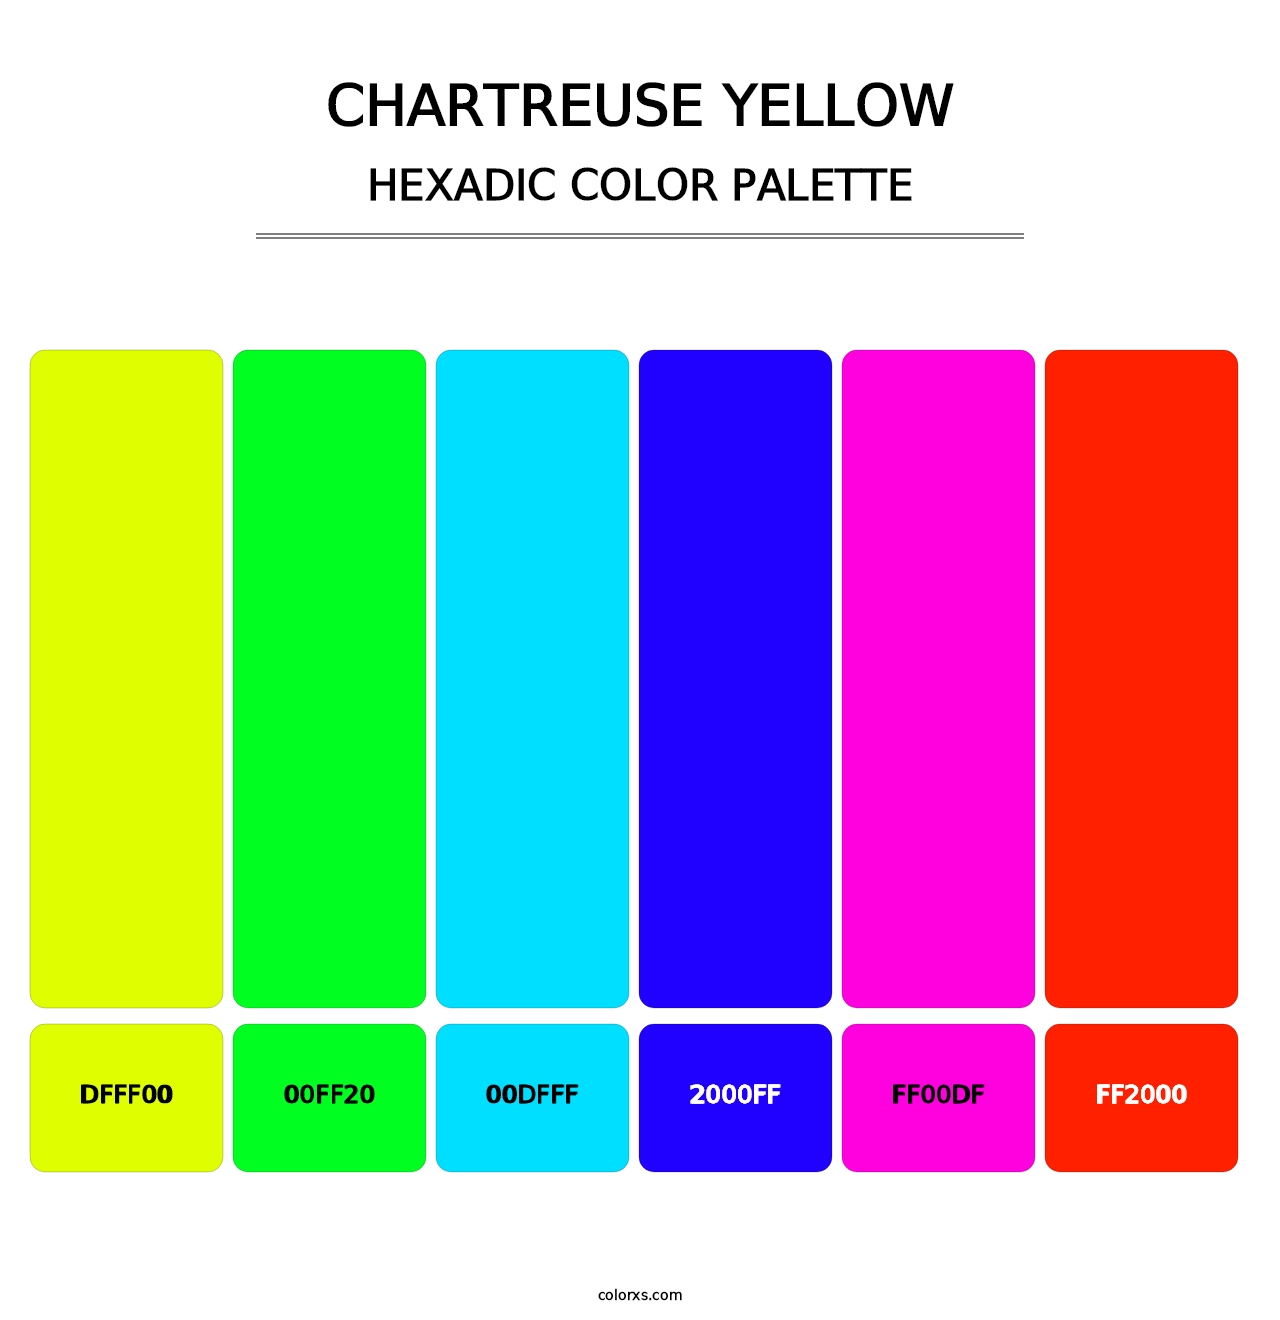 Chartreuse Yellow - Hexadic Color Palette